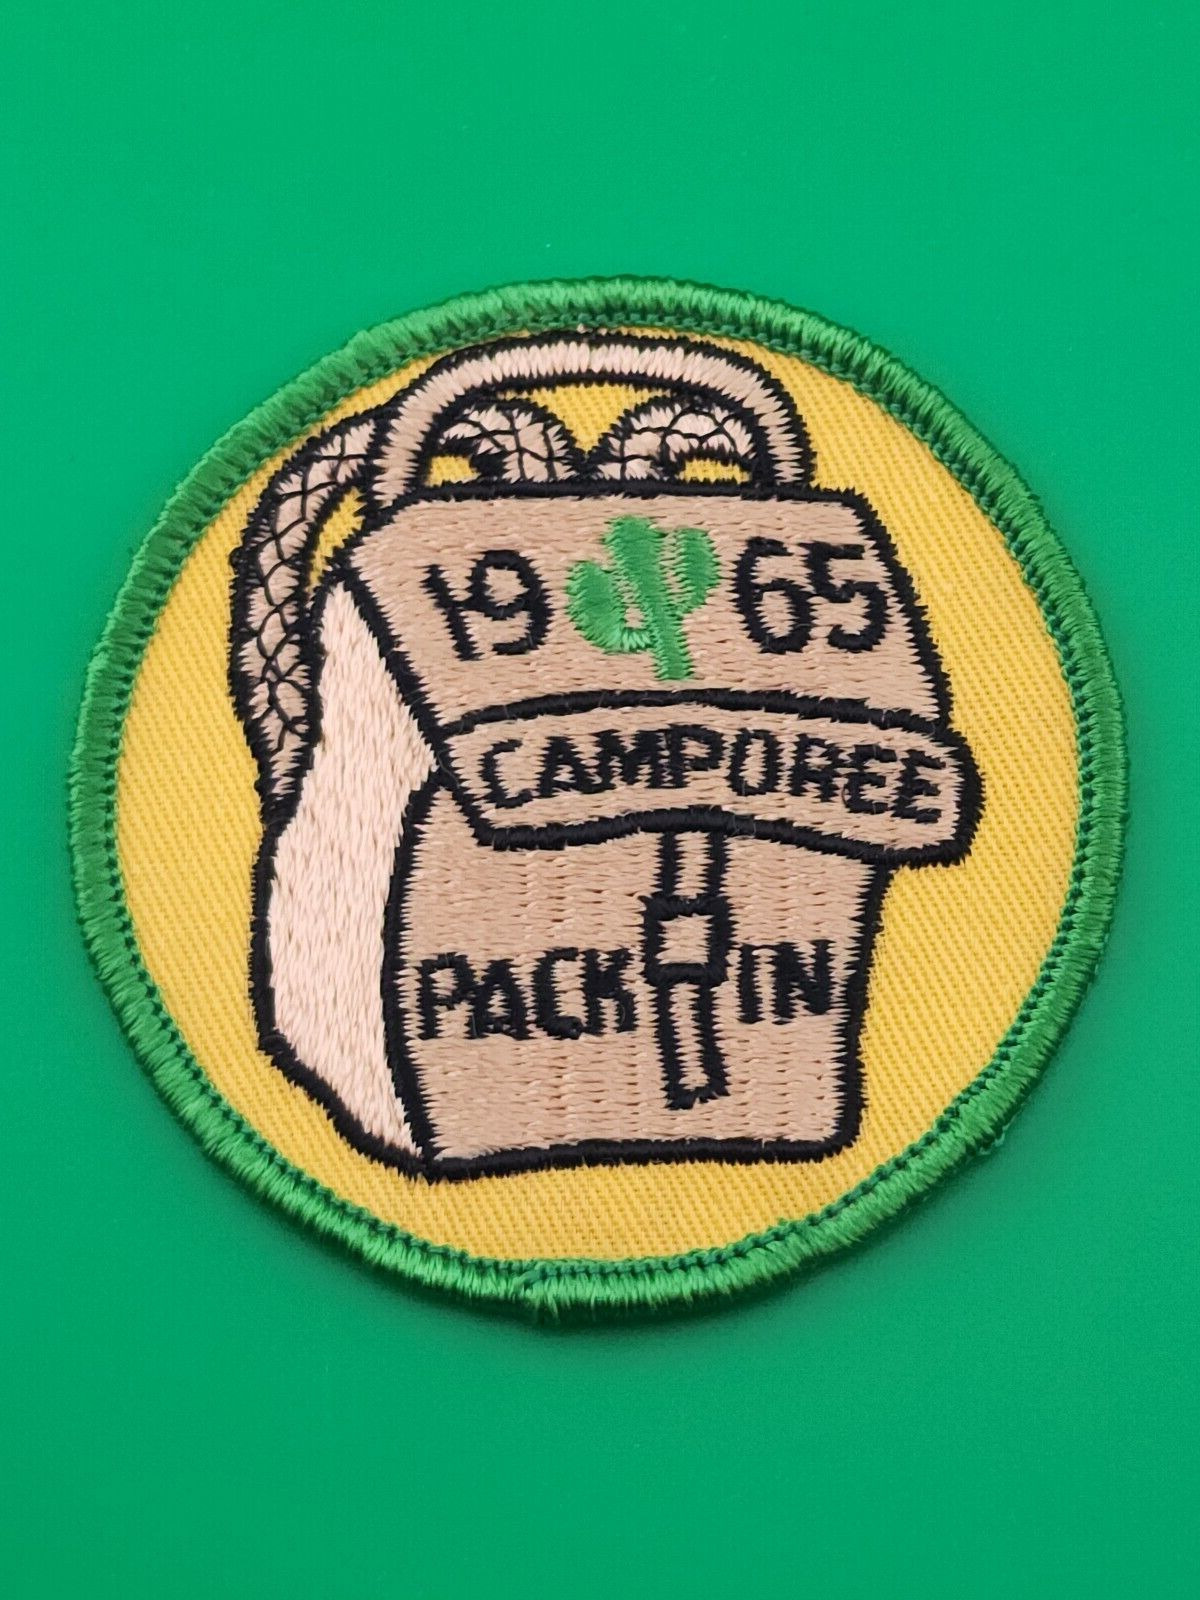 1965 Camporee Pack In Patch BSA Boy Scouts Of America NEW